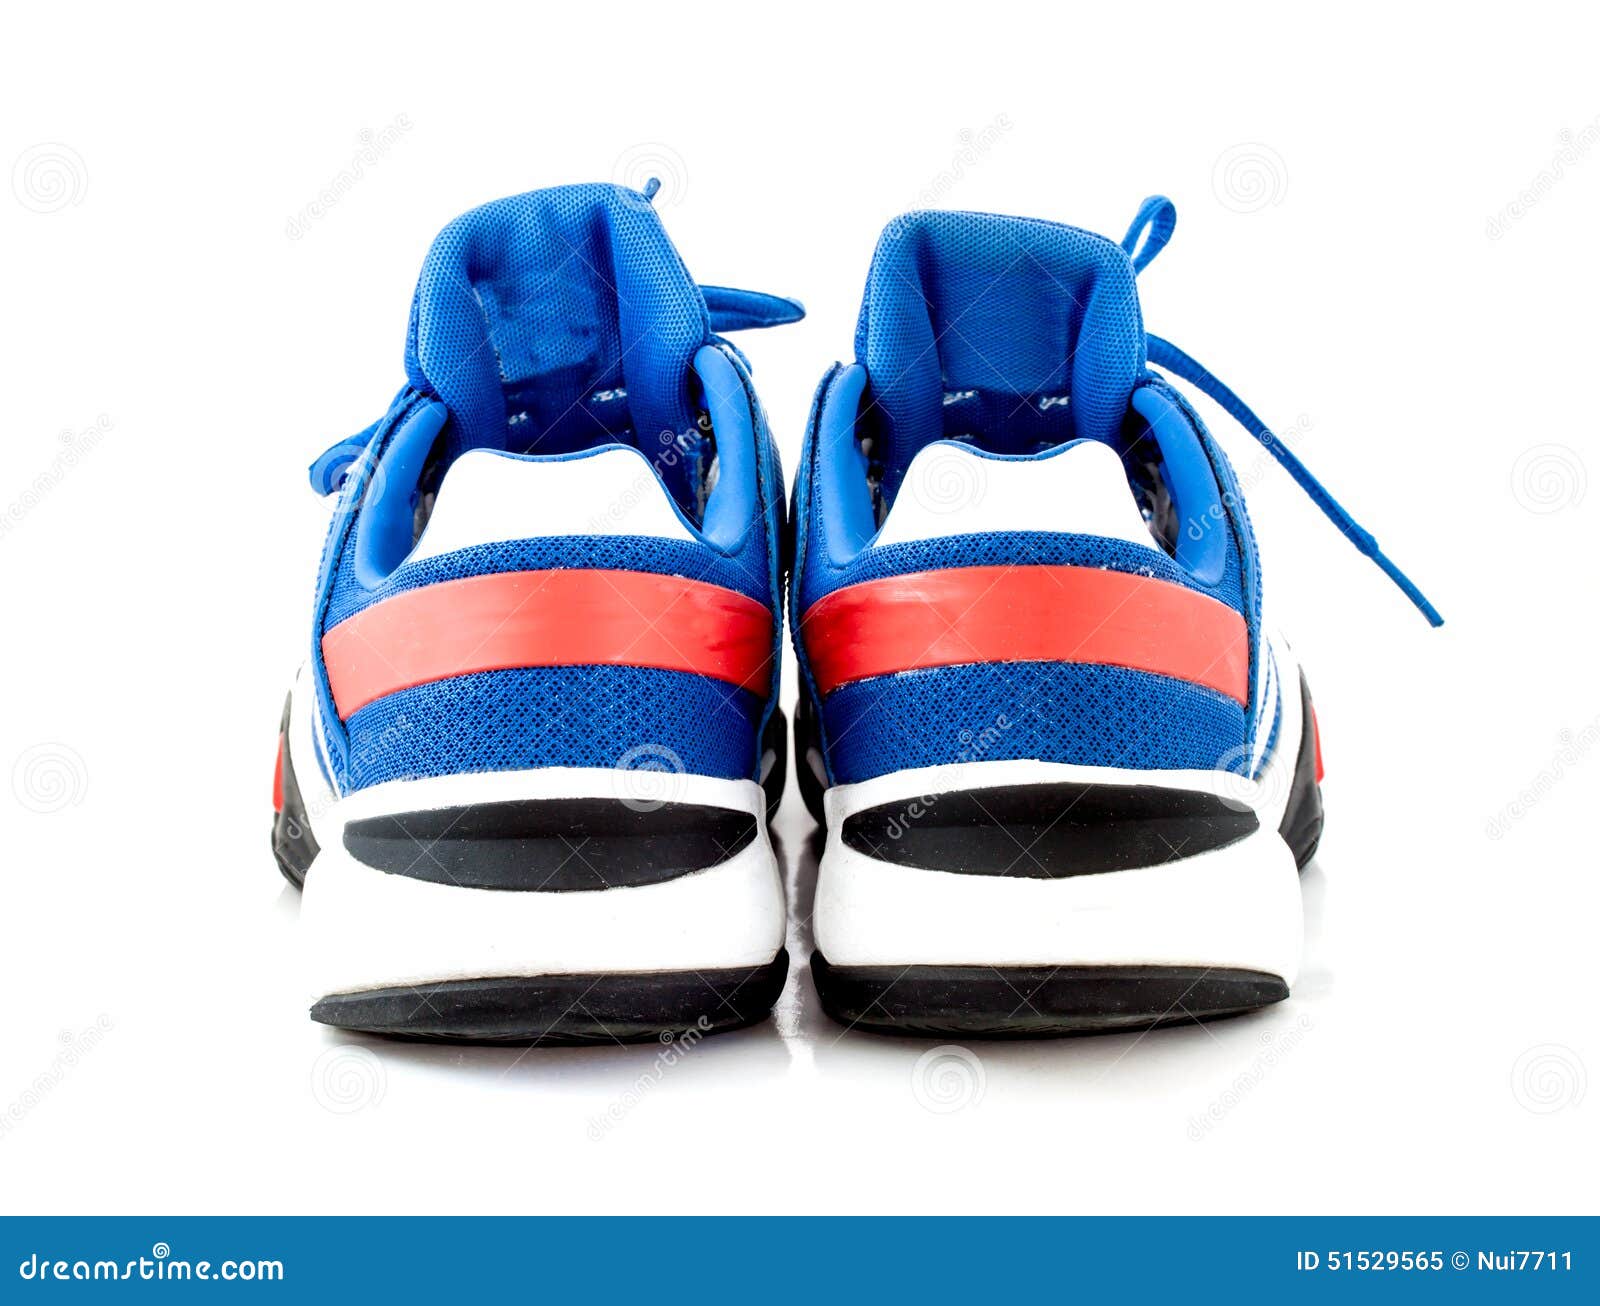 Blue Tennis Shoes on White Backgound Stock Image - Image of sneakers ...